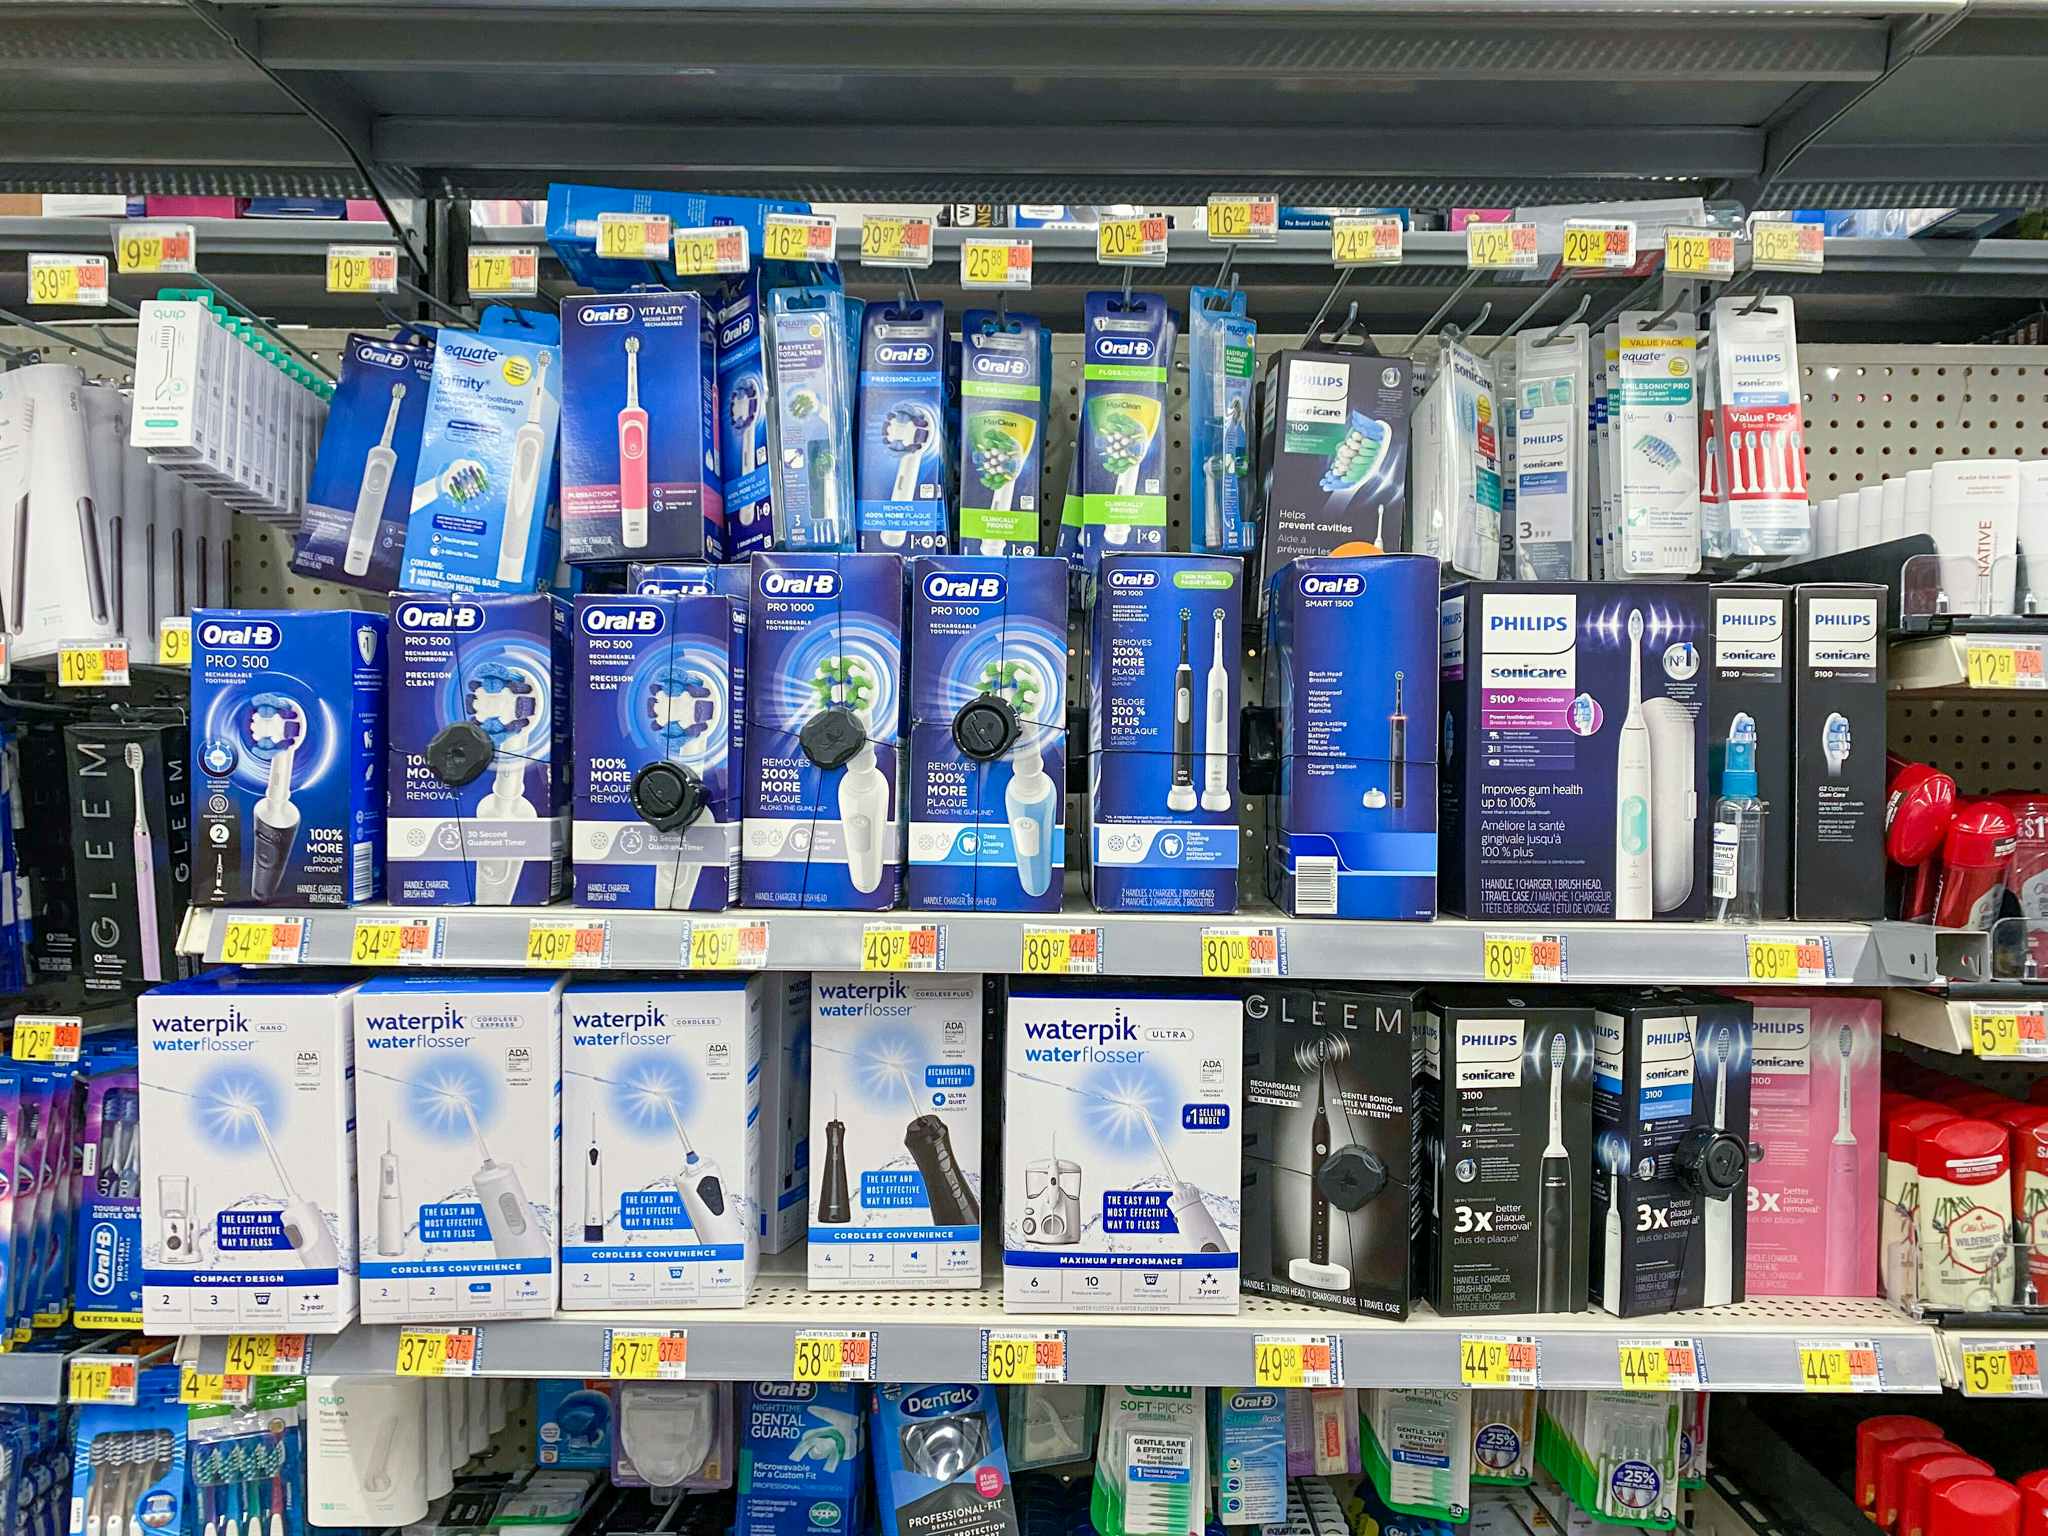 Electric toothbrushes and supplies on display at Walmart